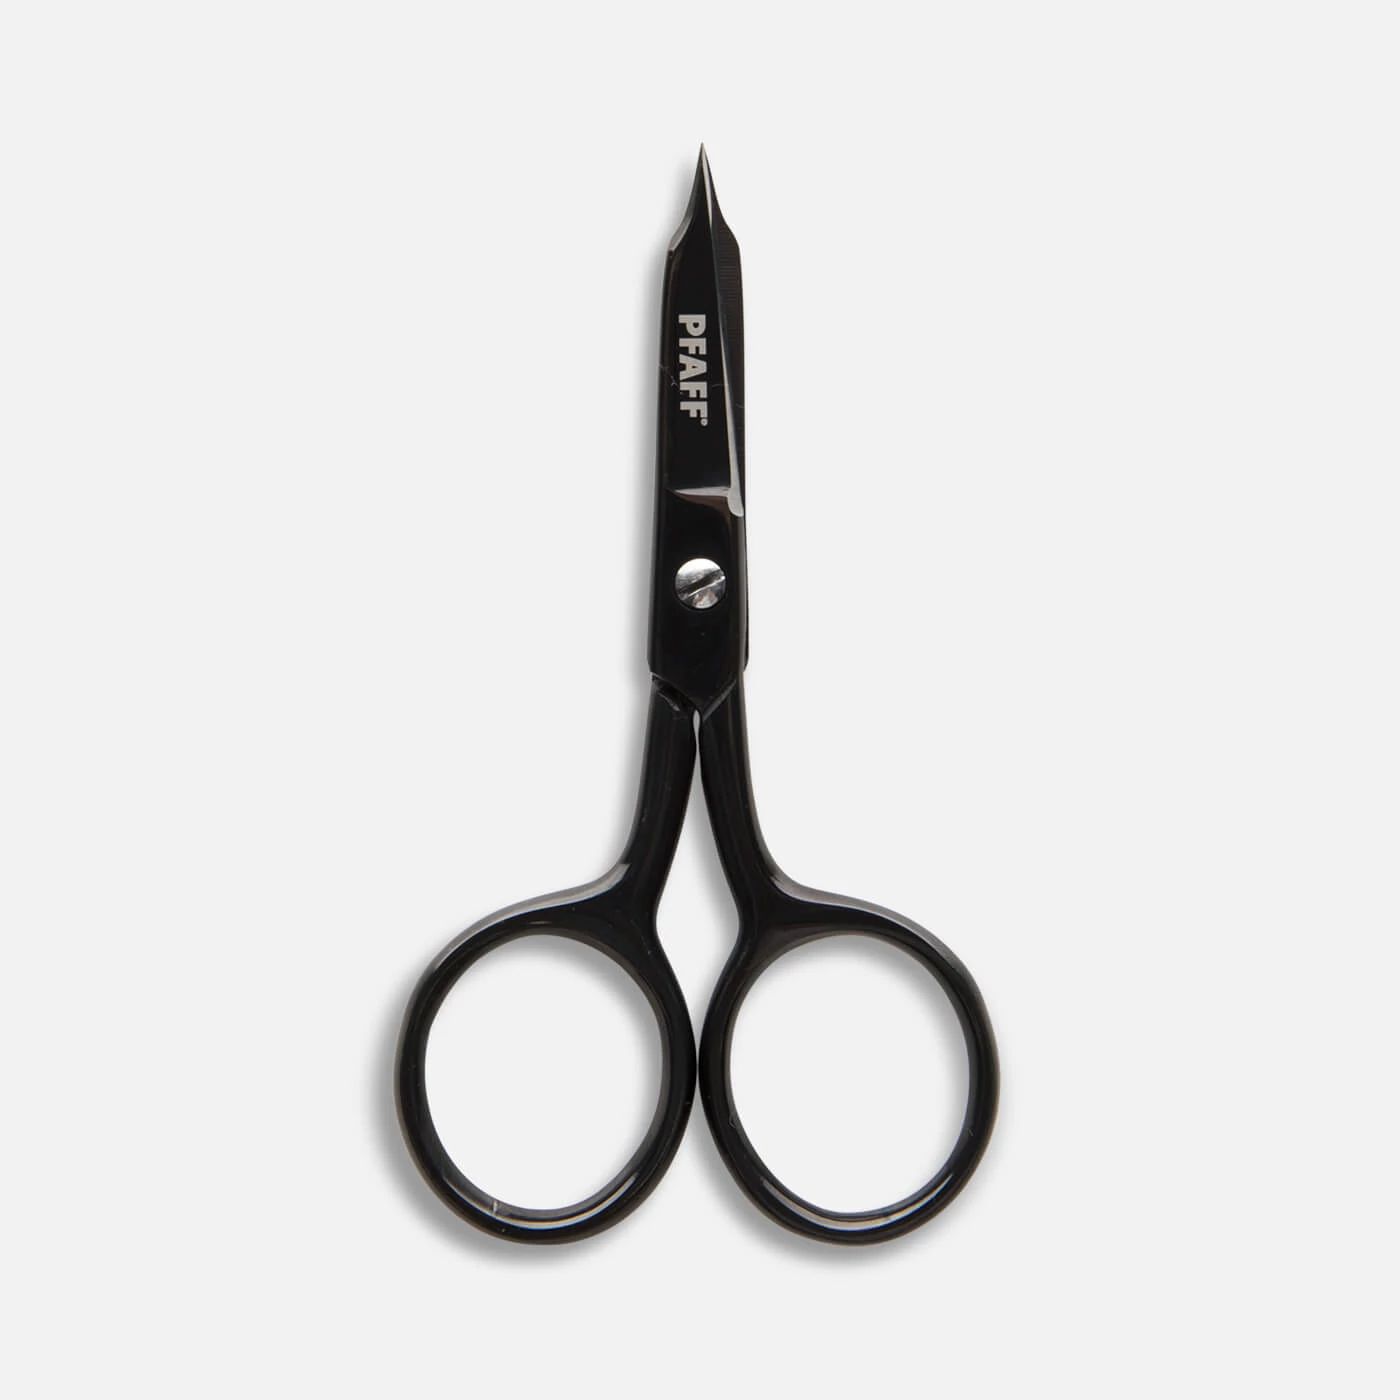 Embroidery Scissors Curved Blade From Sew Mate 